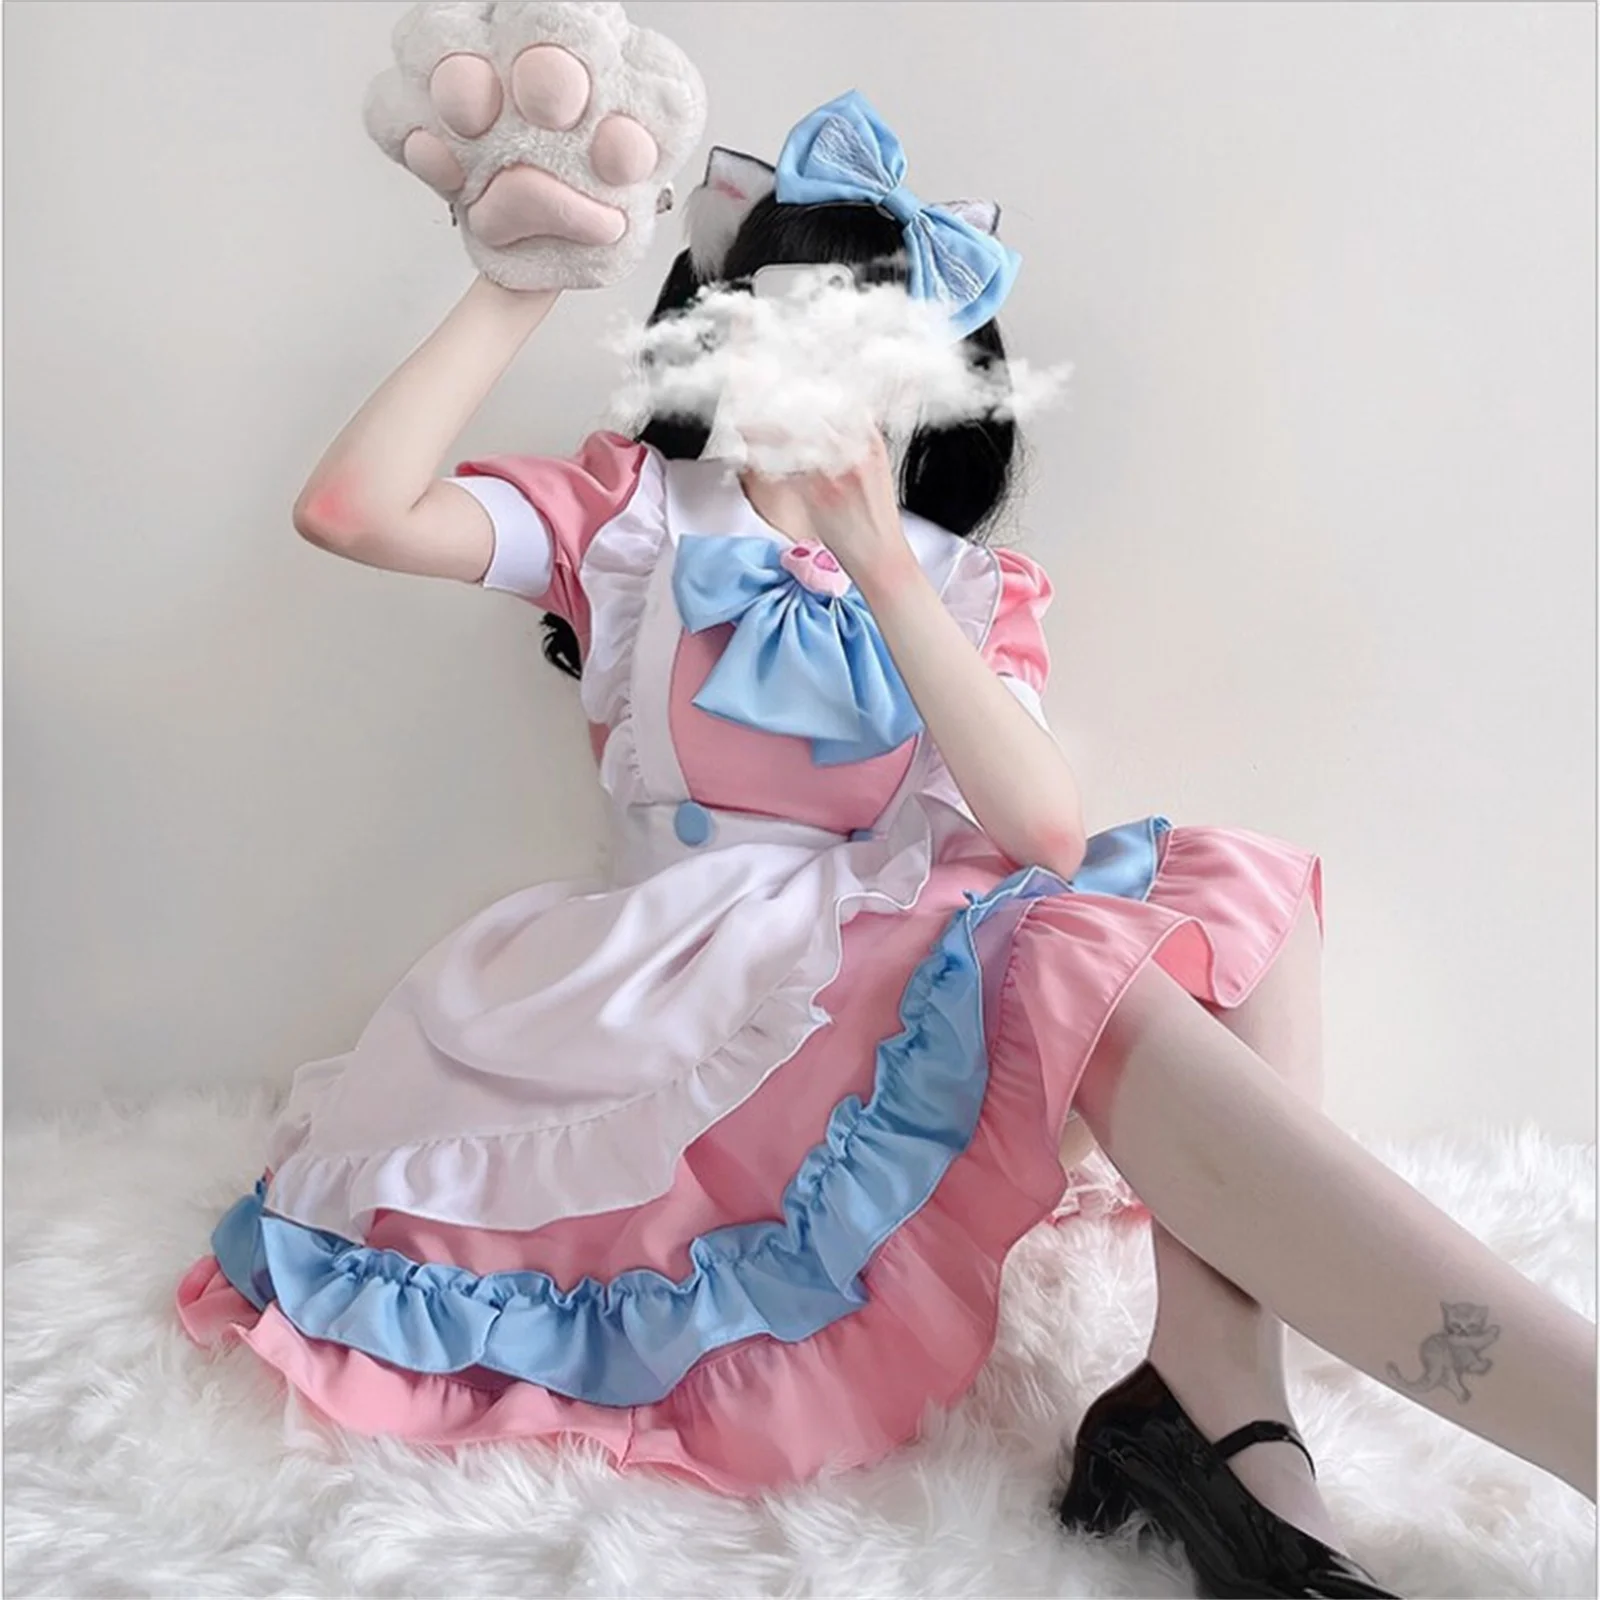 Kawaii Lolita Anime Maid Outfit Pink + Blue Cosplay Maid Outfit Lolita Skirt Costume Cute Japanese Cosplay Costume Anime Outfit images - 6